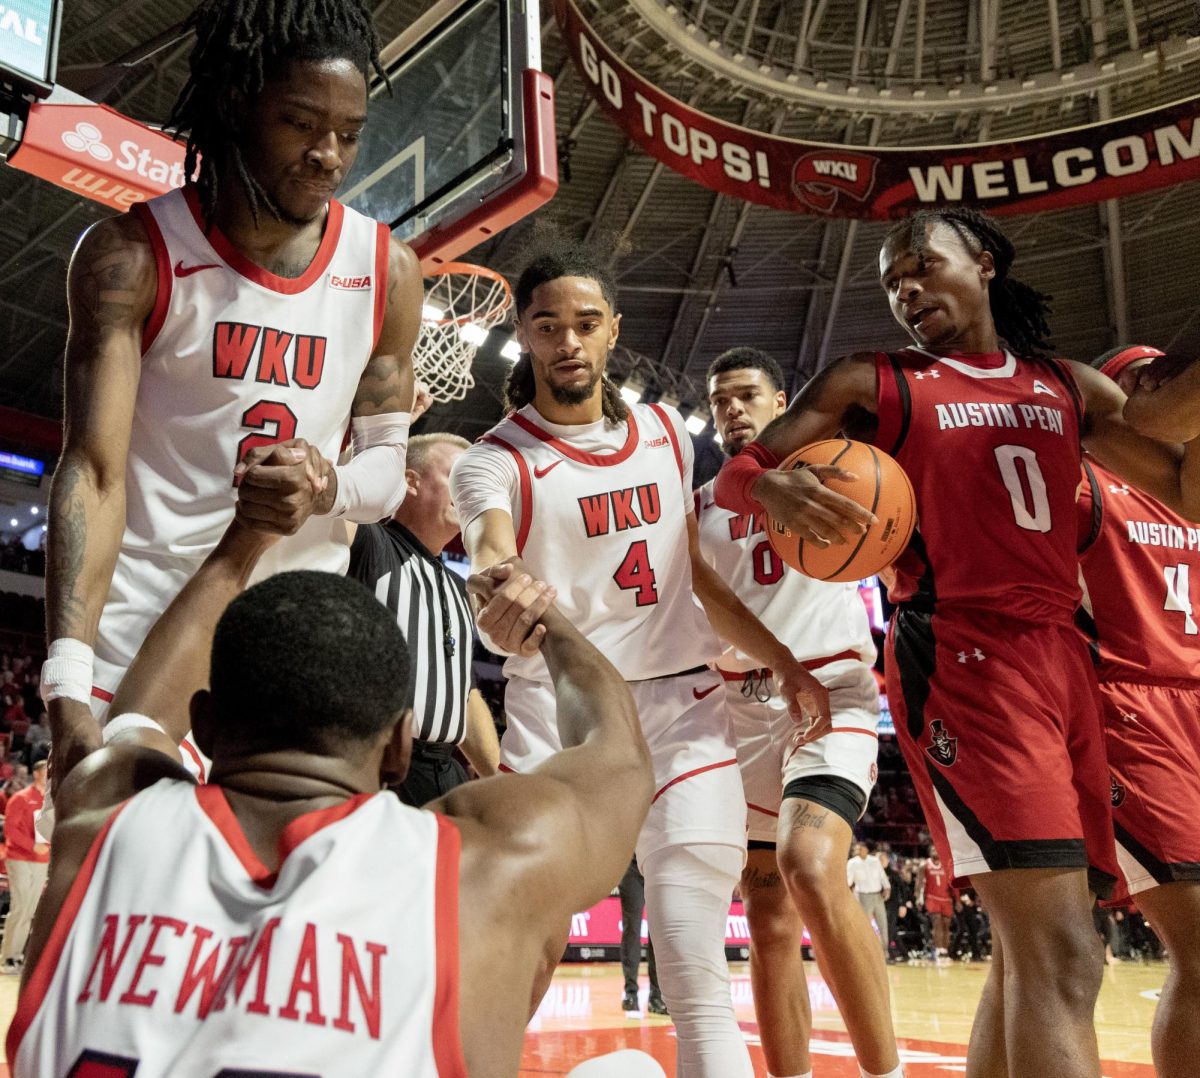 Newmans 25 points lead Hilltoppers over Gamecocks